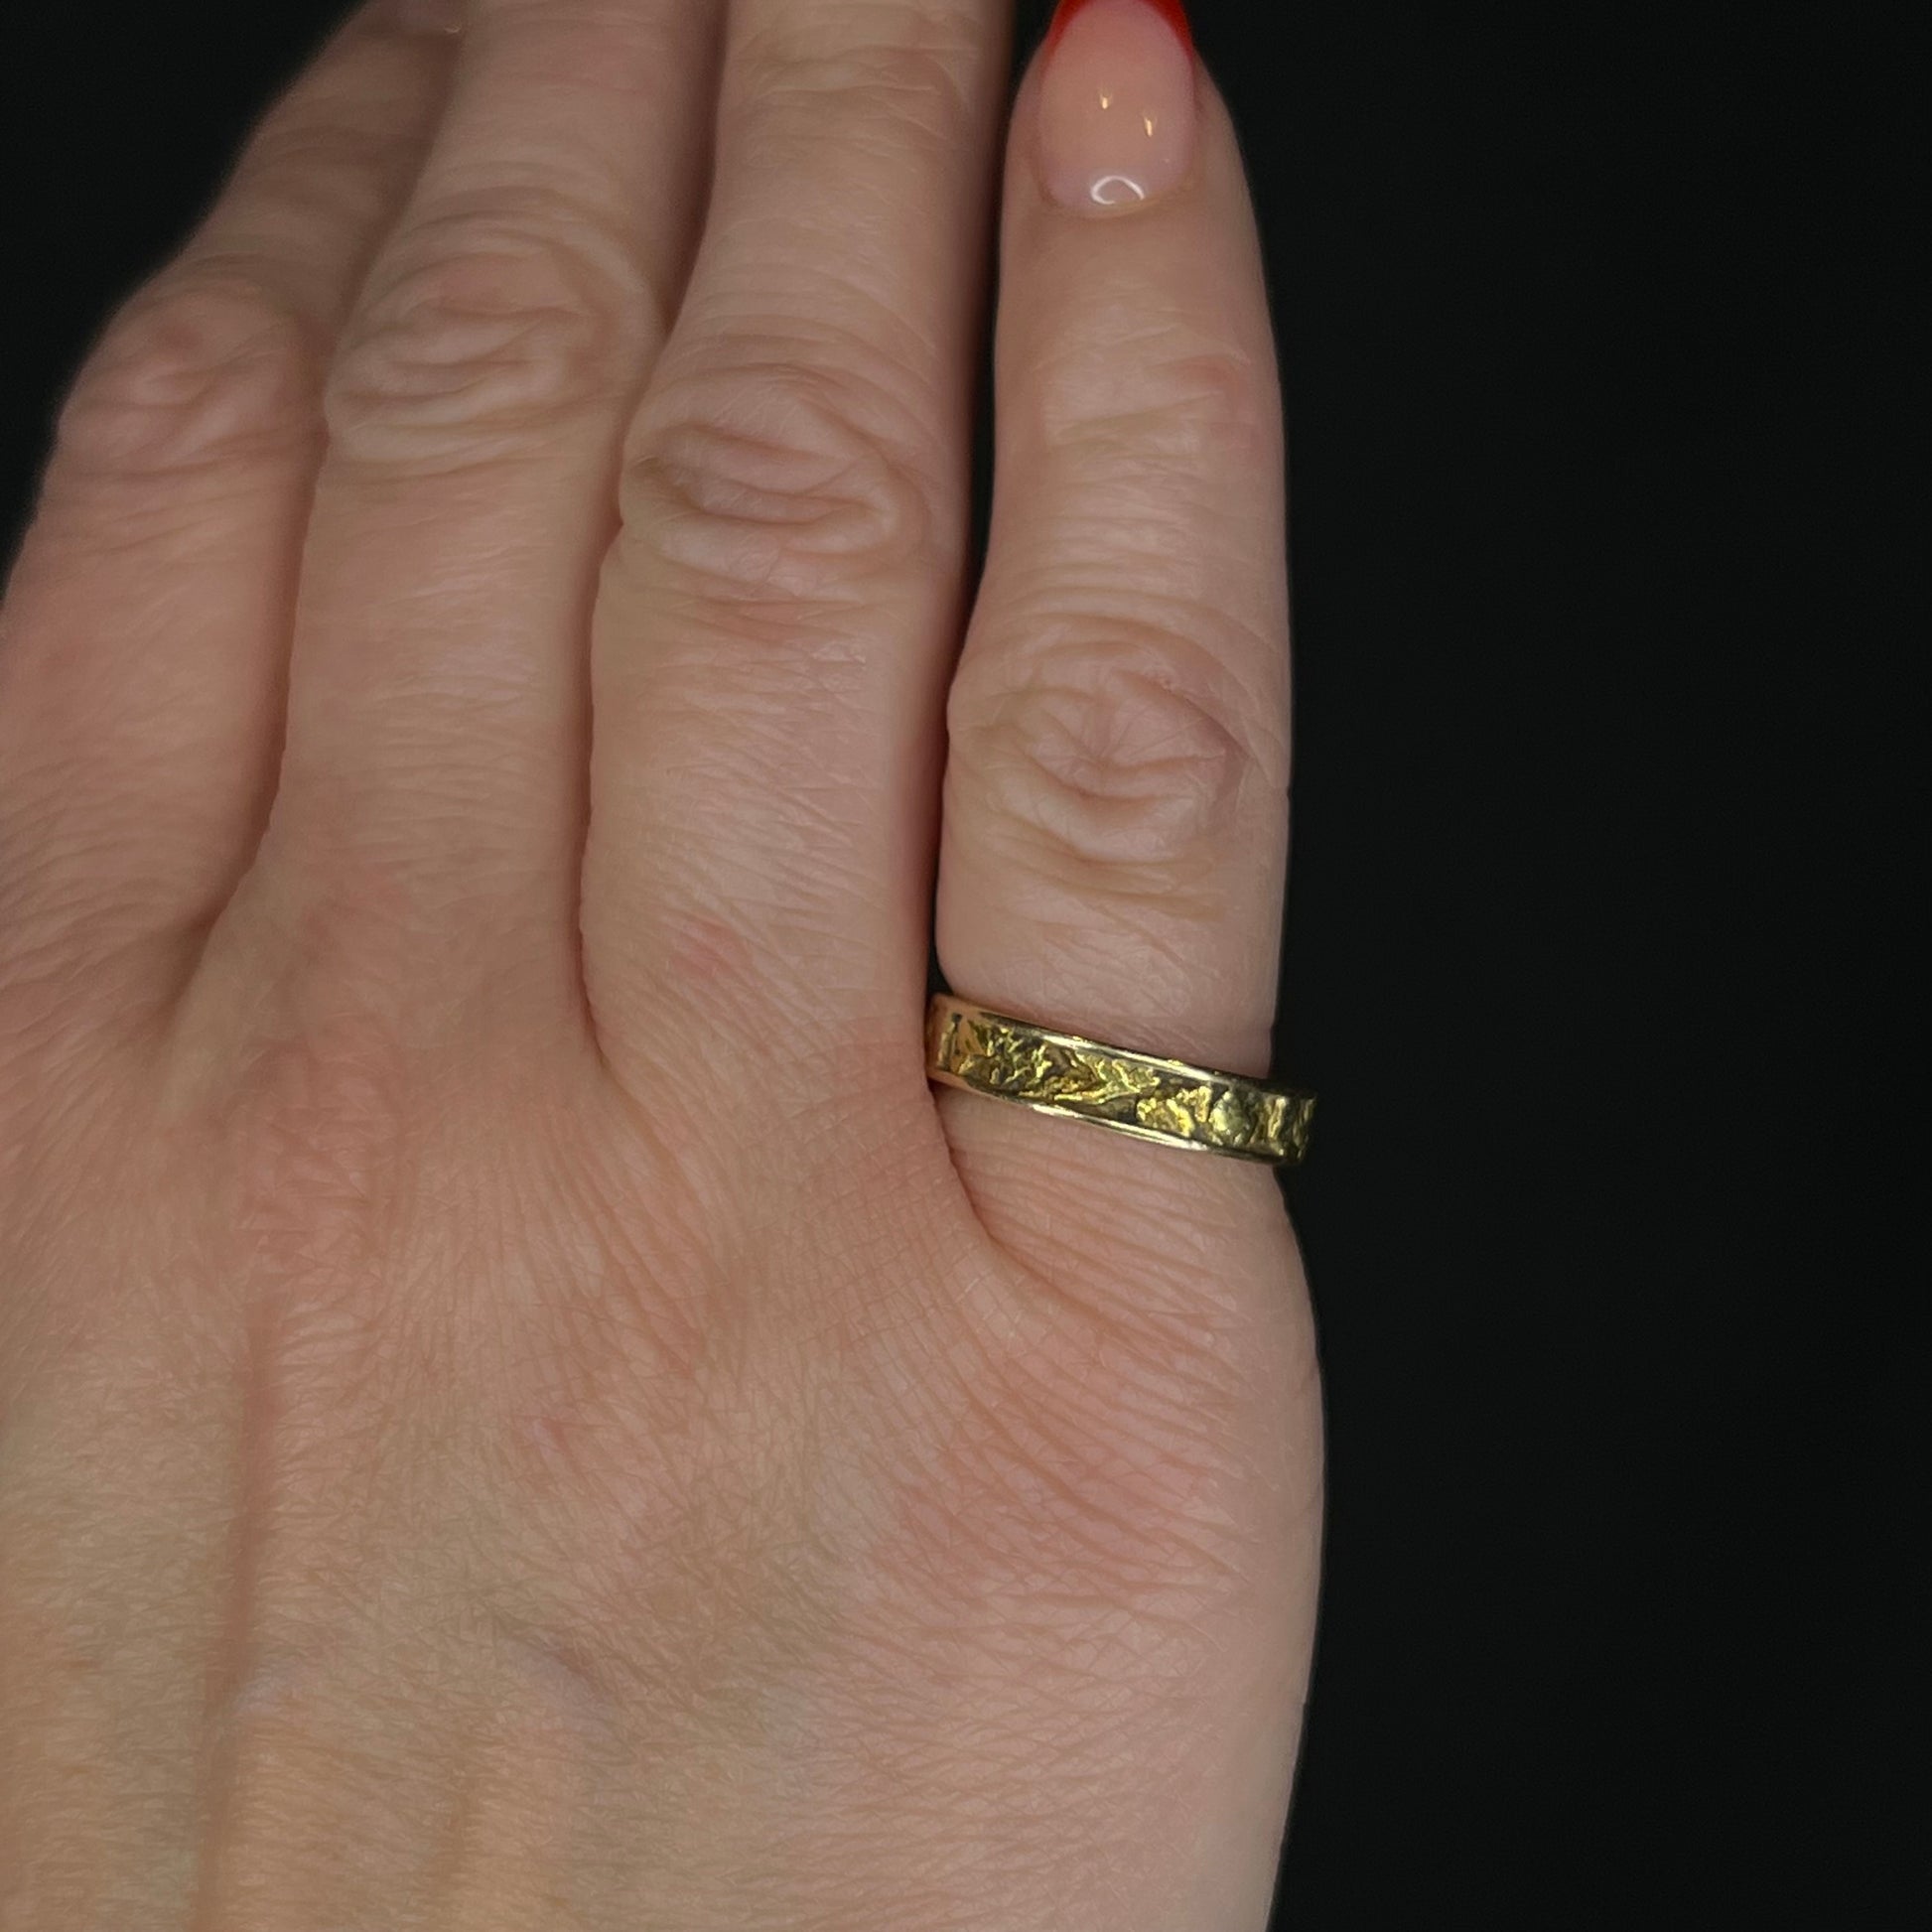 Mid-Century Gold Nugget Wedding Band in 14k Yellow GoldComposition: 14 Karat Yellow GoldRing Size: 4.75Total Gram Weight: 3.9 gInscription: 14k MFR - MJ  6-18-'66